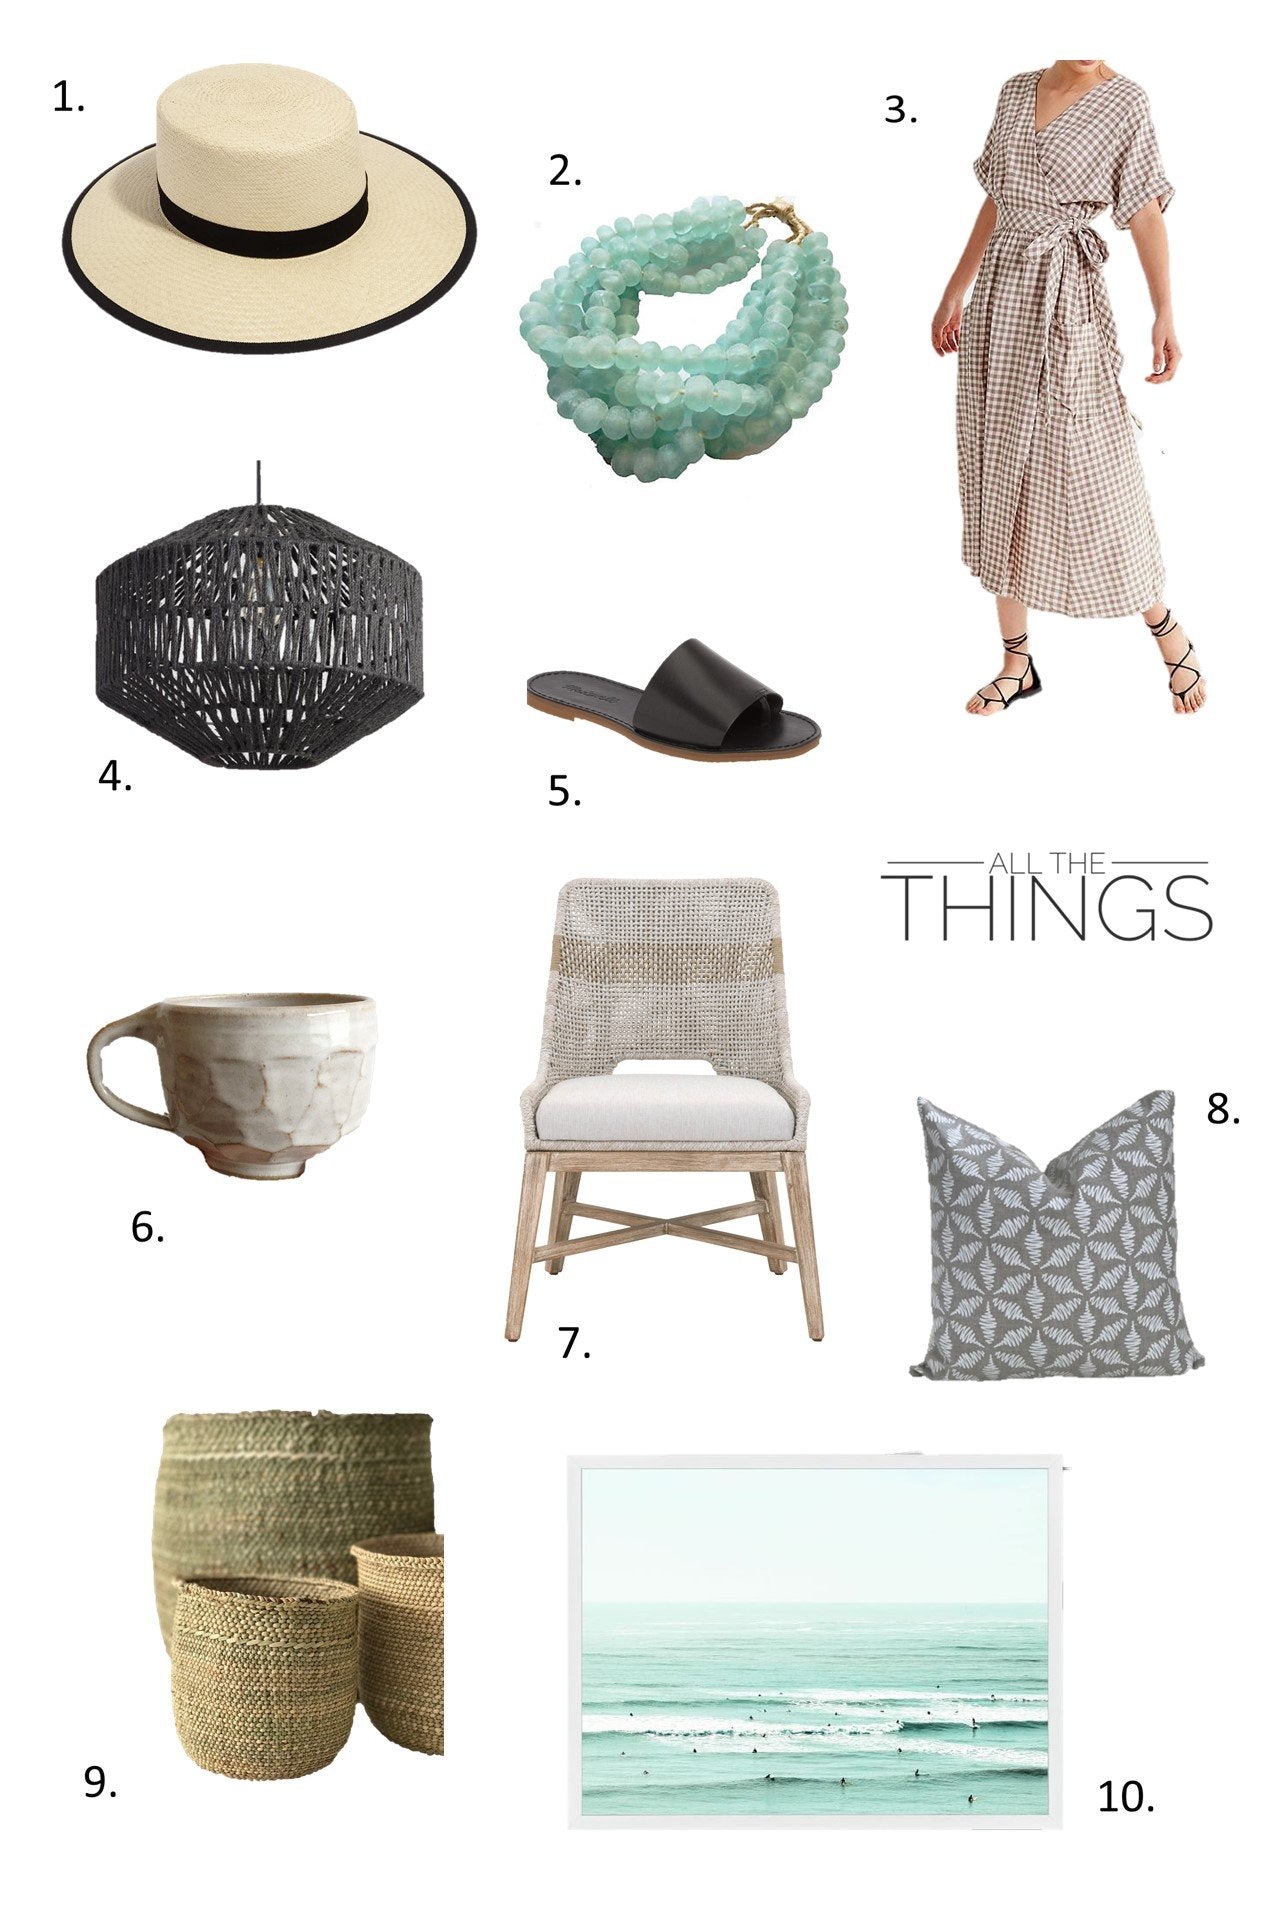 All the things: Summertime